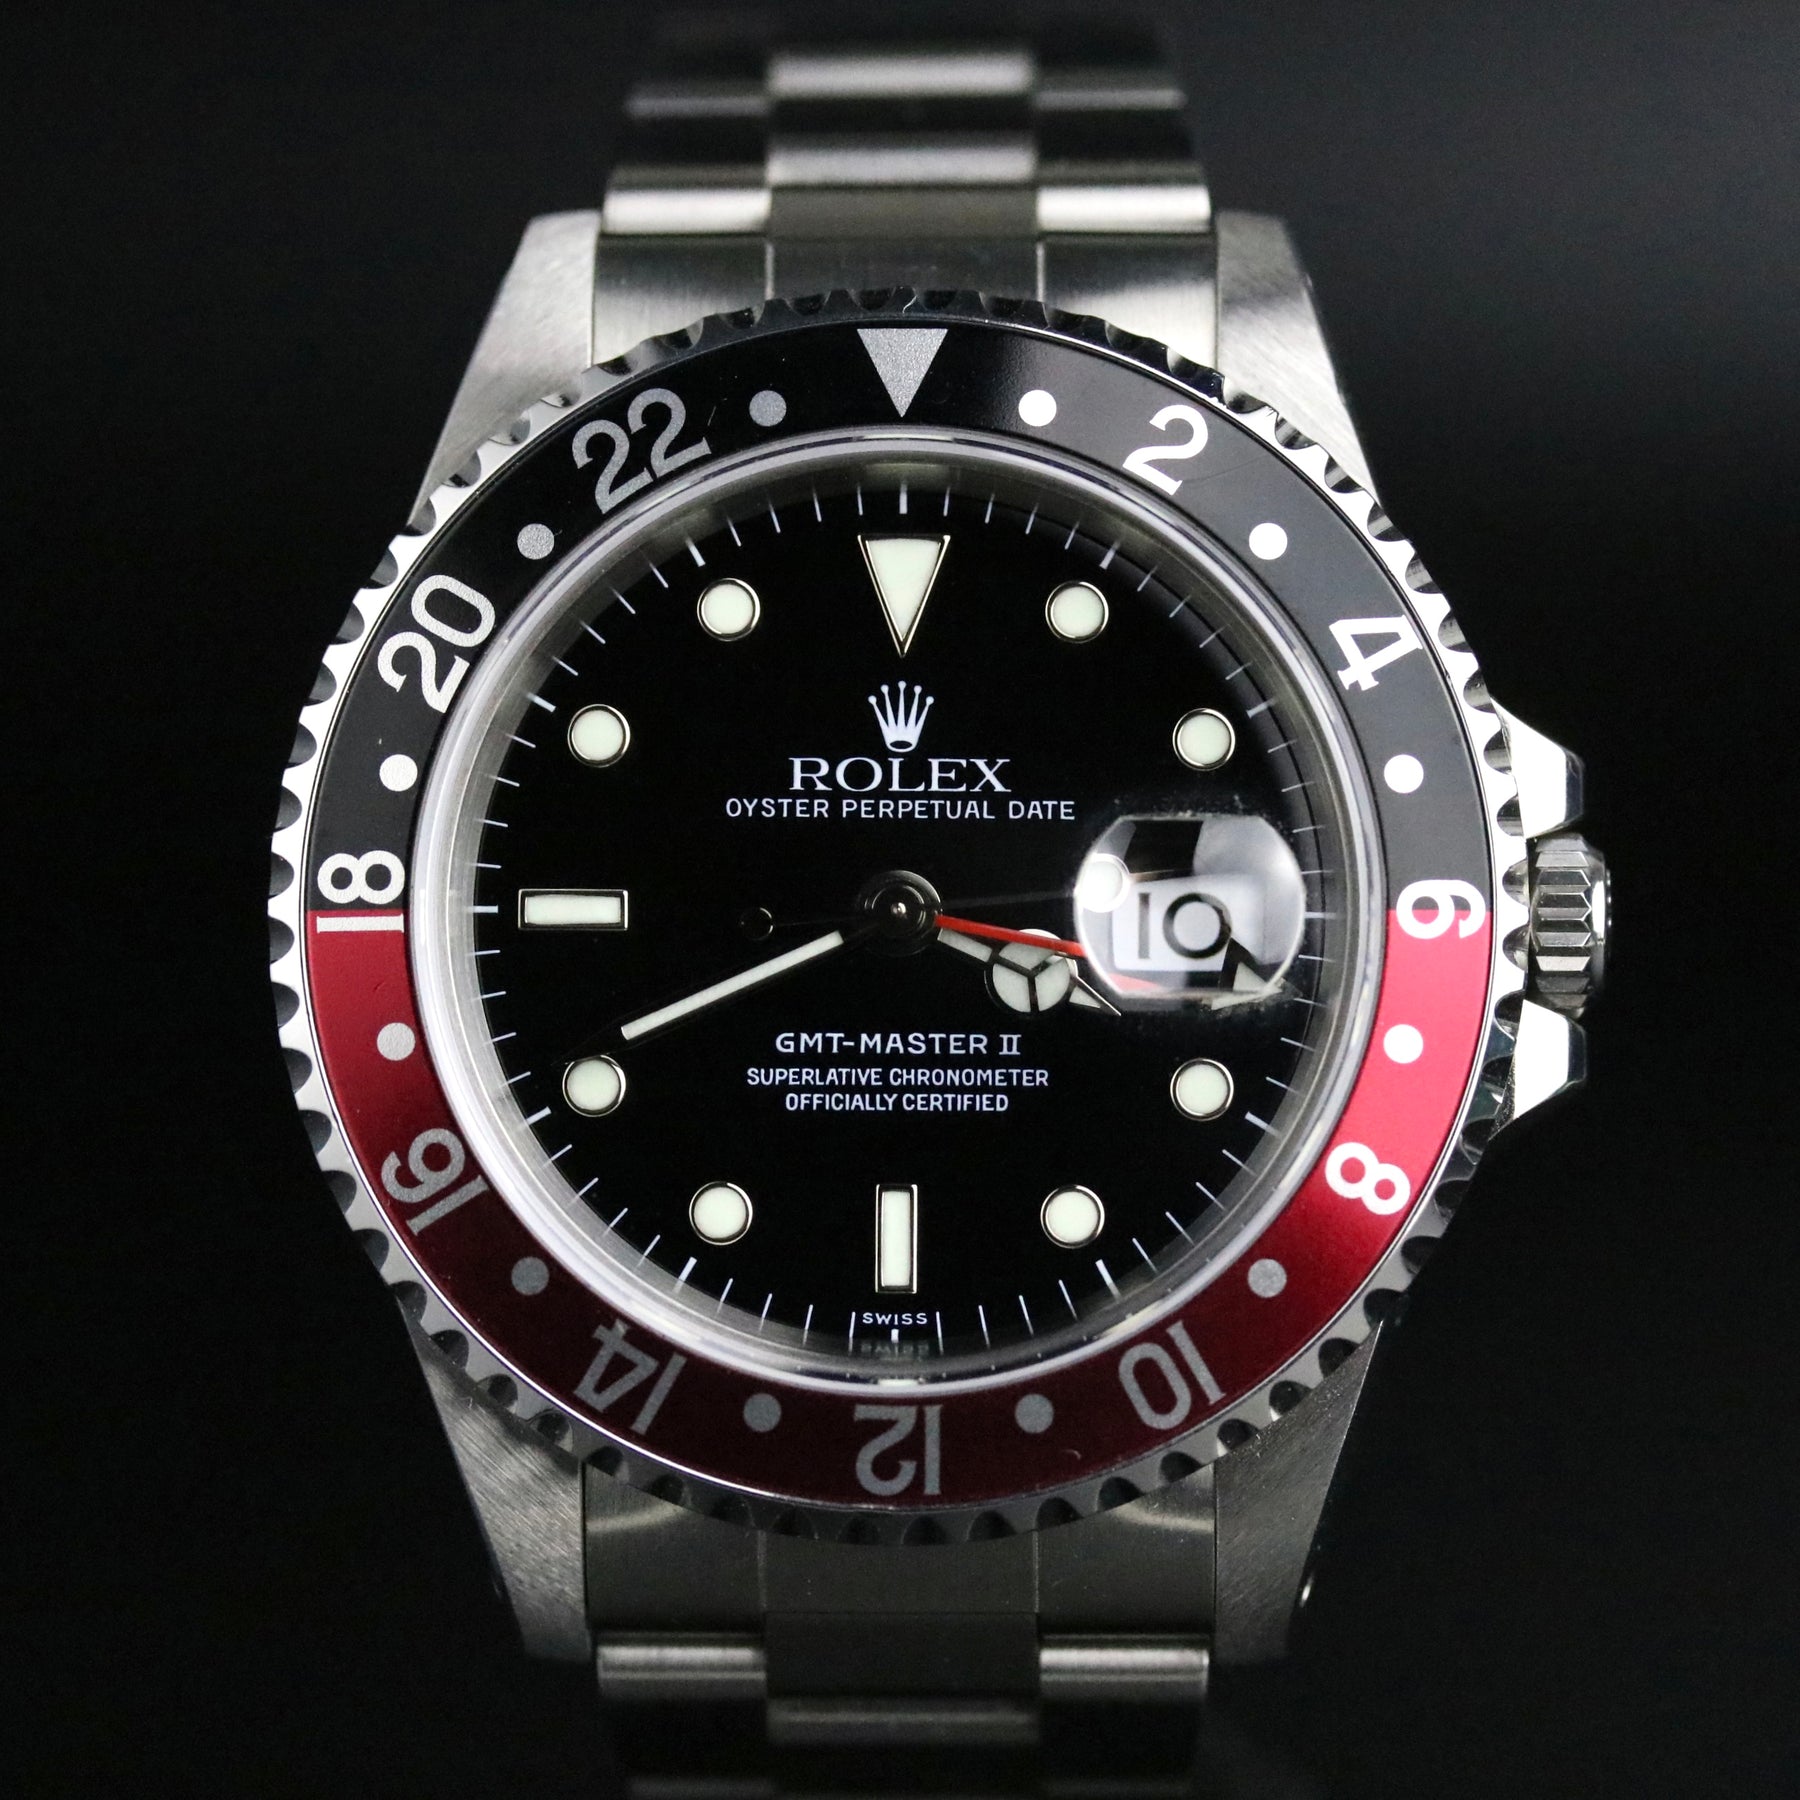 1997 Rolex 16710 GMT-MASTER II "Coke" with Box & Papers